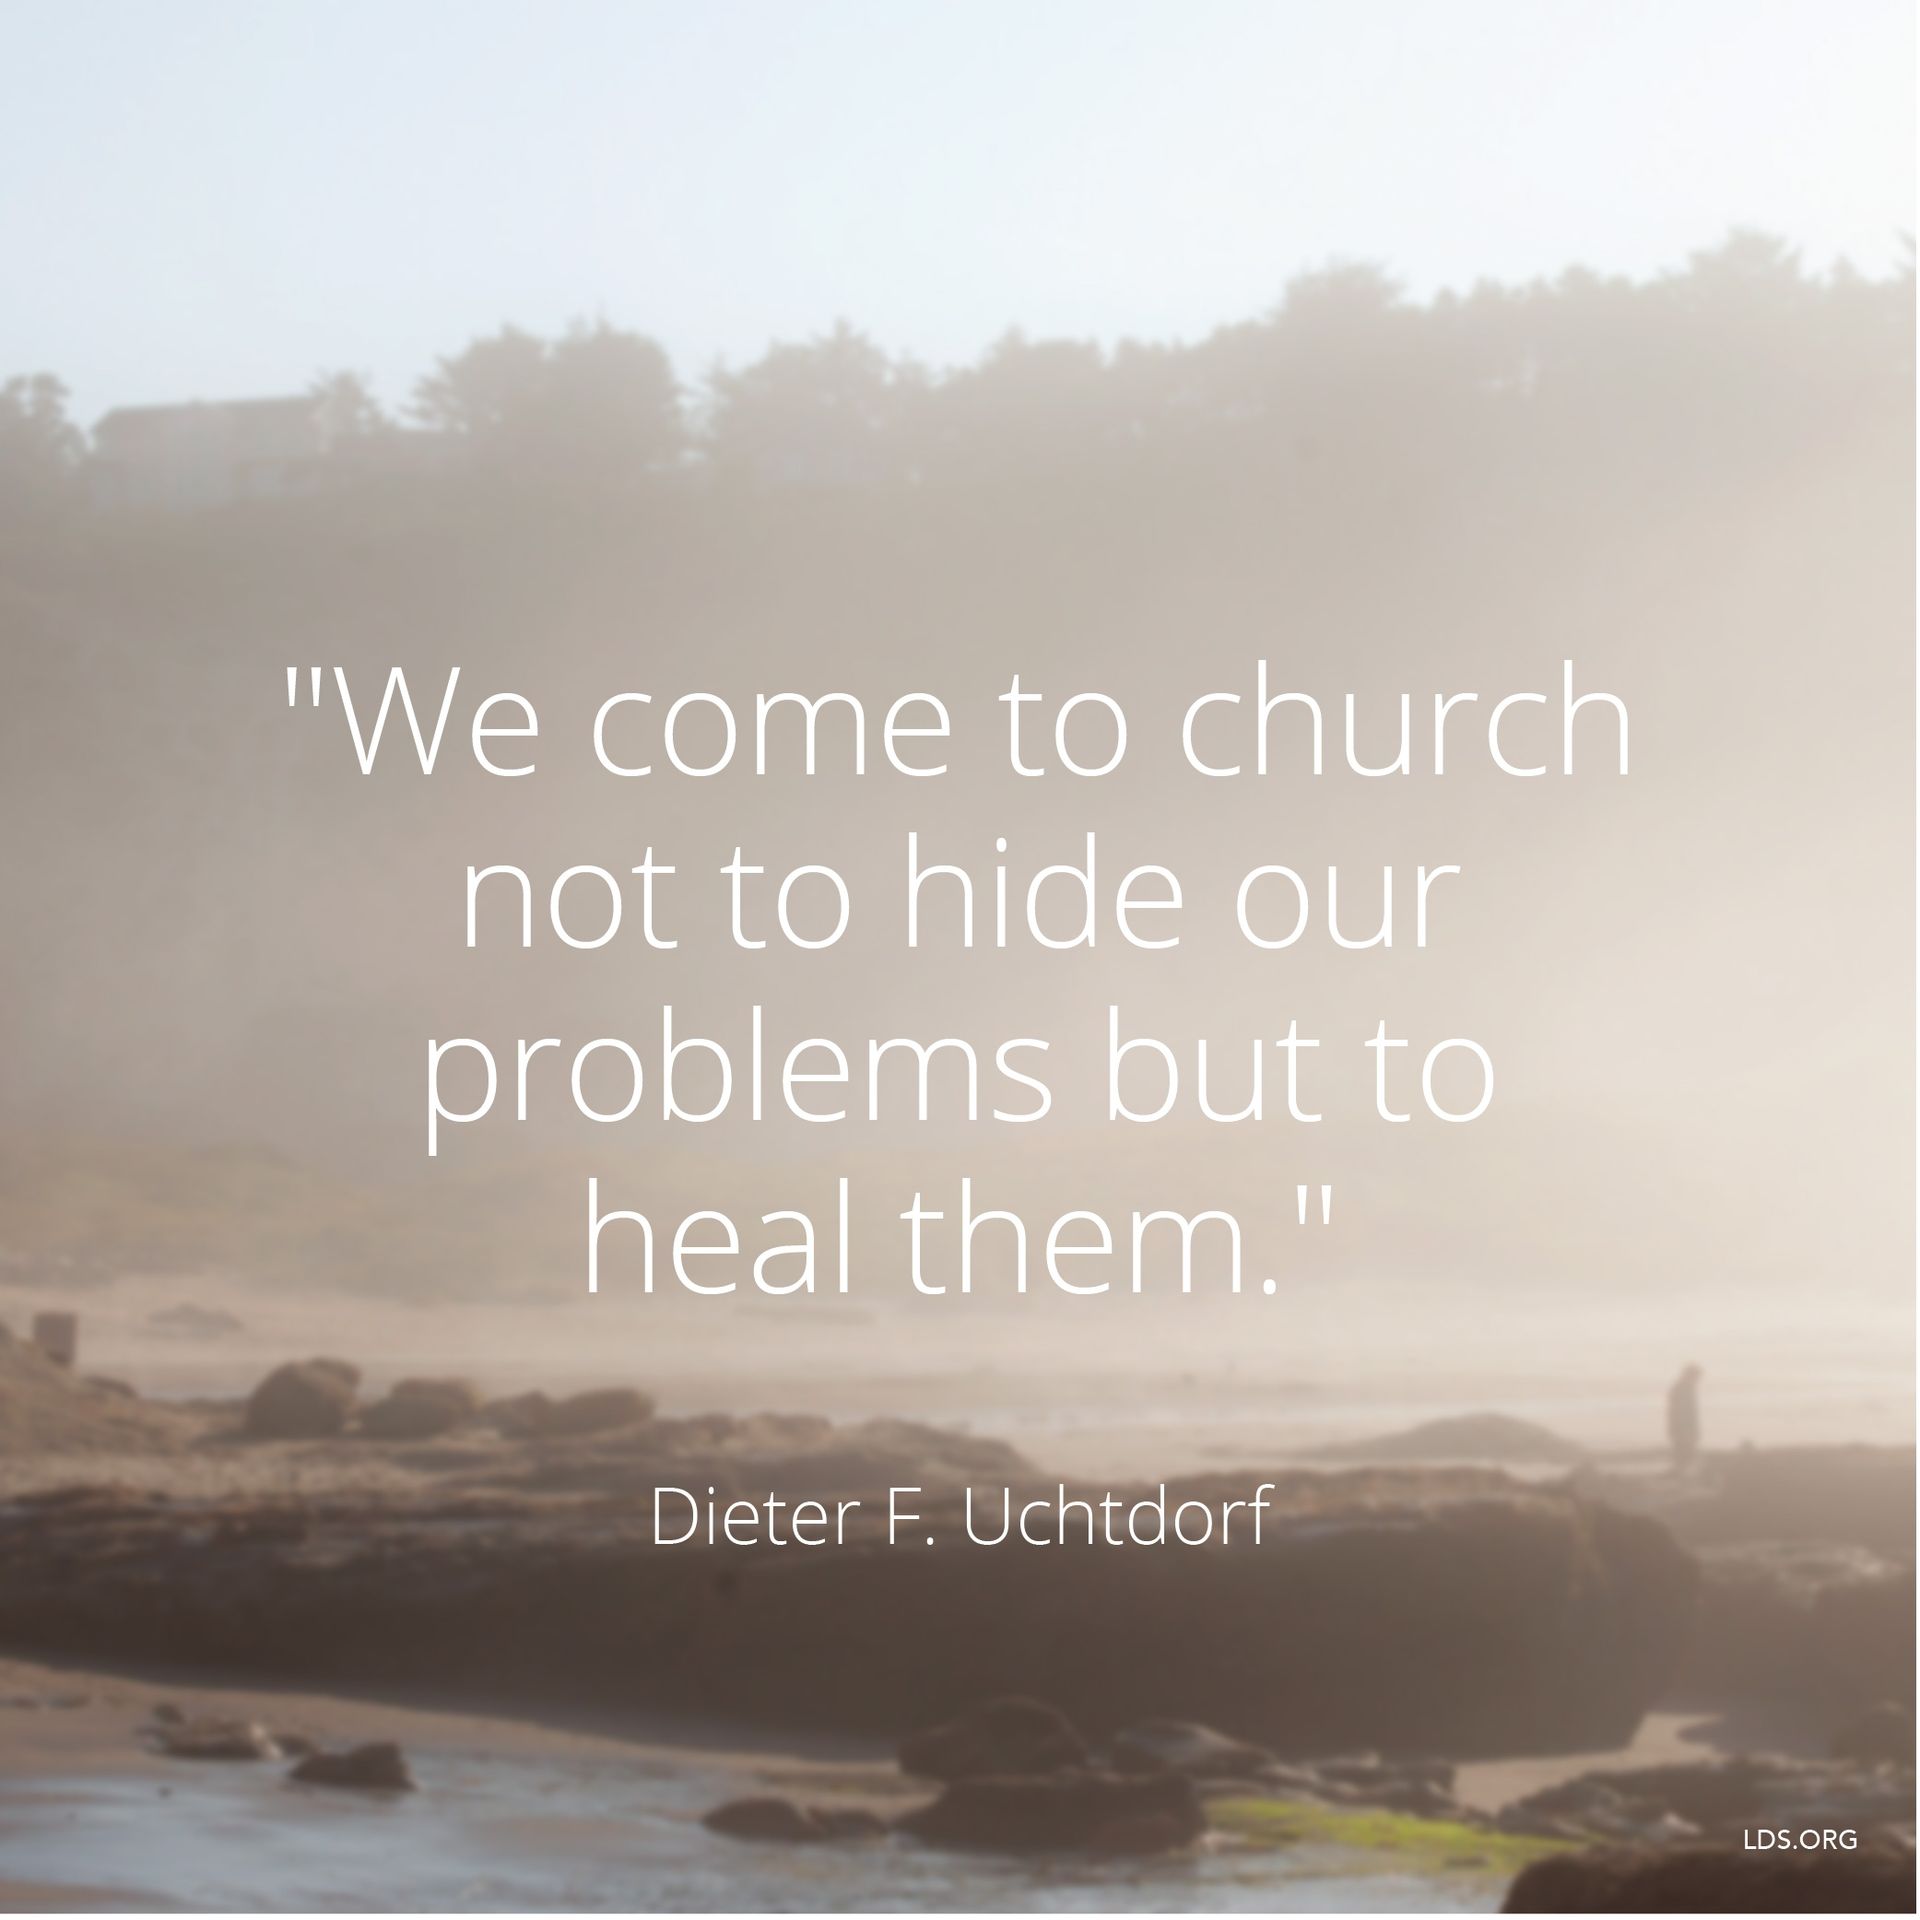 “We come to church not to hide our problems but to heal them.”—President Dieter F. Uchtdorf, “On Being Genuine” © undefined ipCode 1.